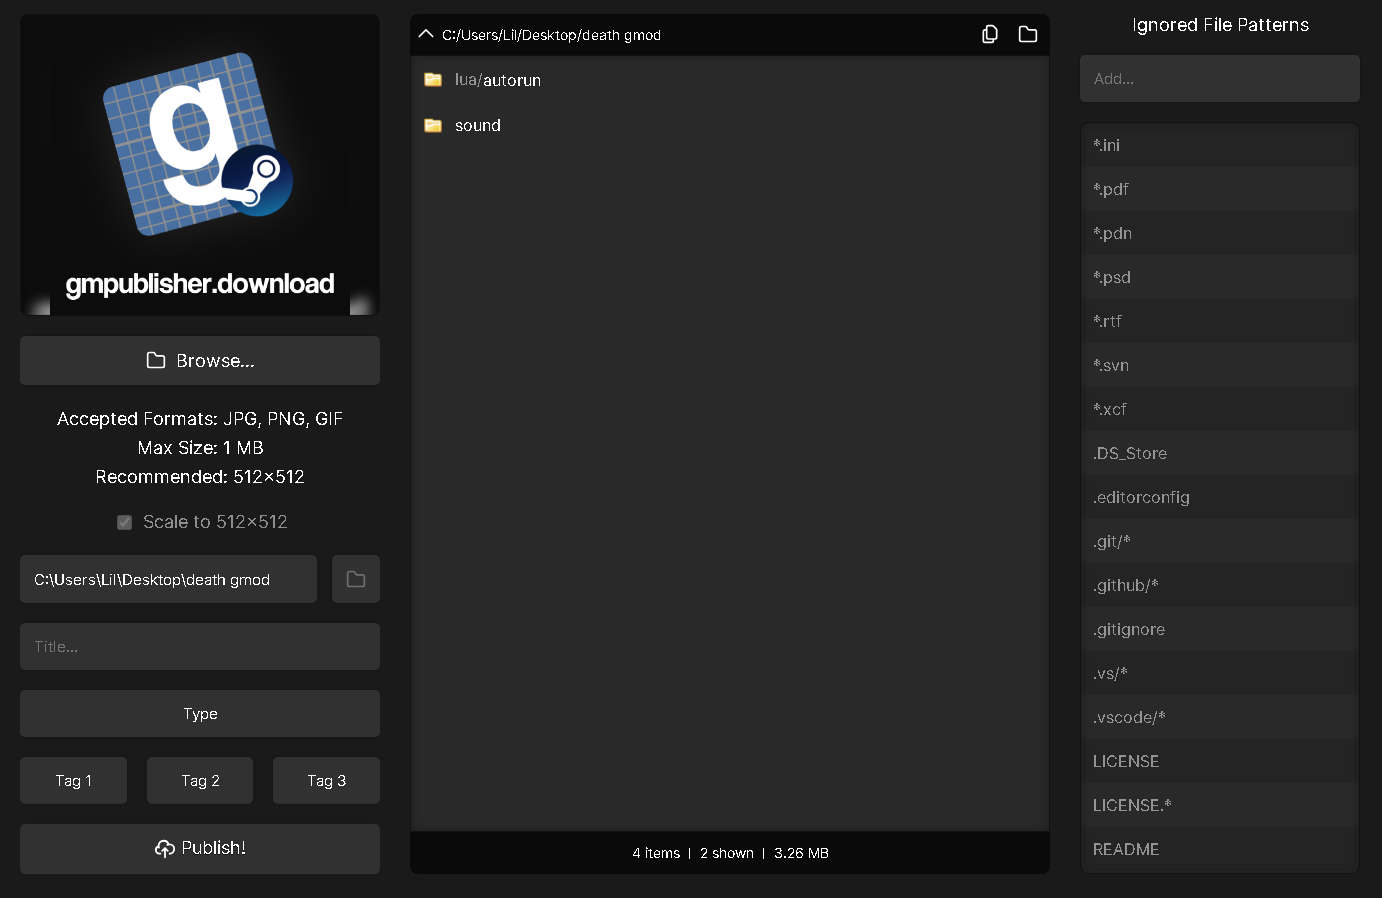 Gmod How To Download Friends Addons